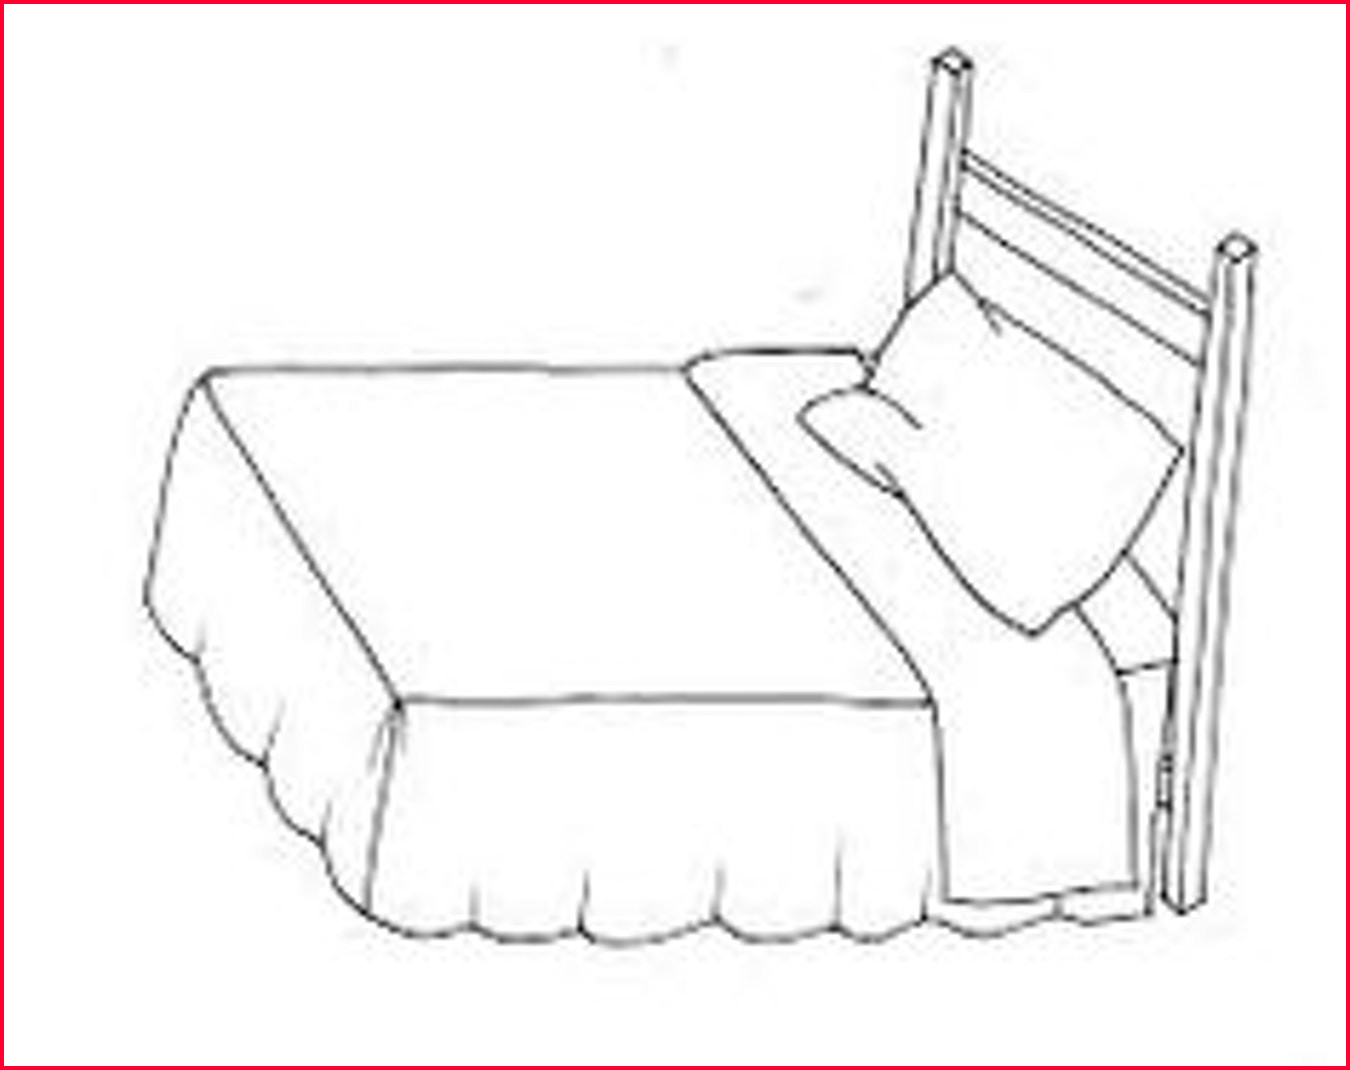 Bed Picture Drawing | Another Home Image Ideas